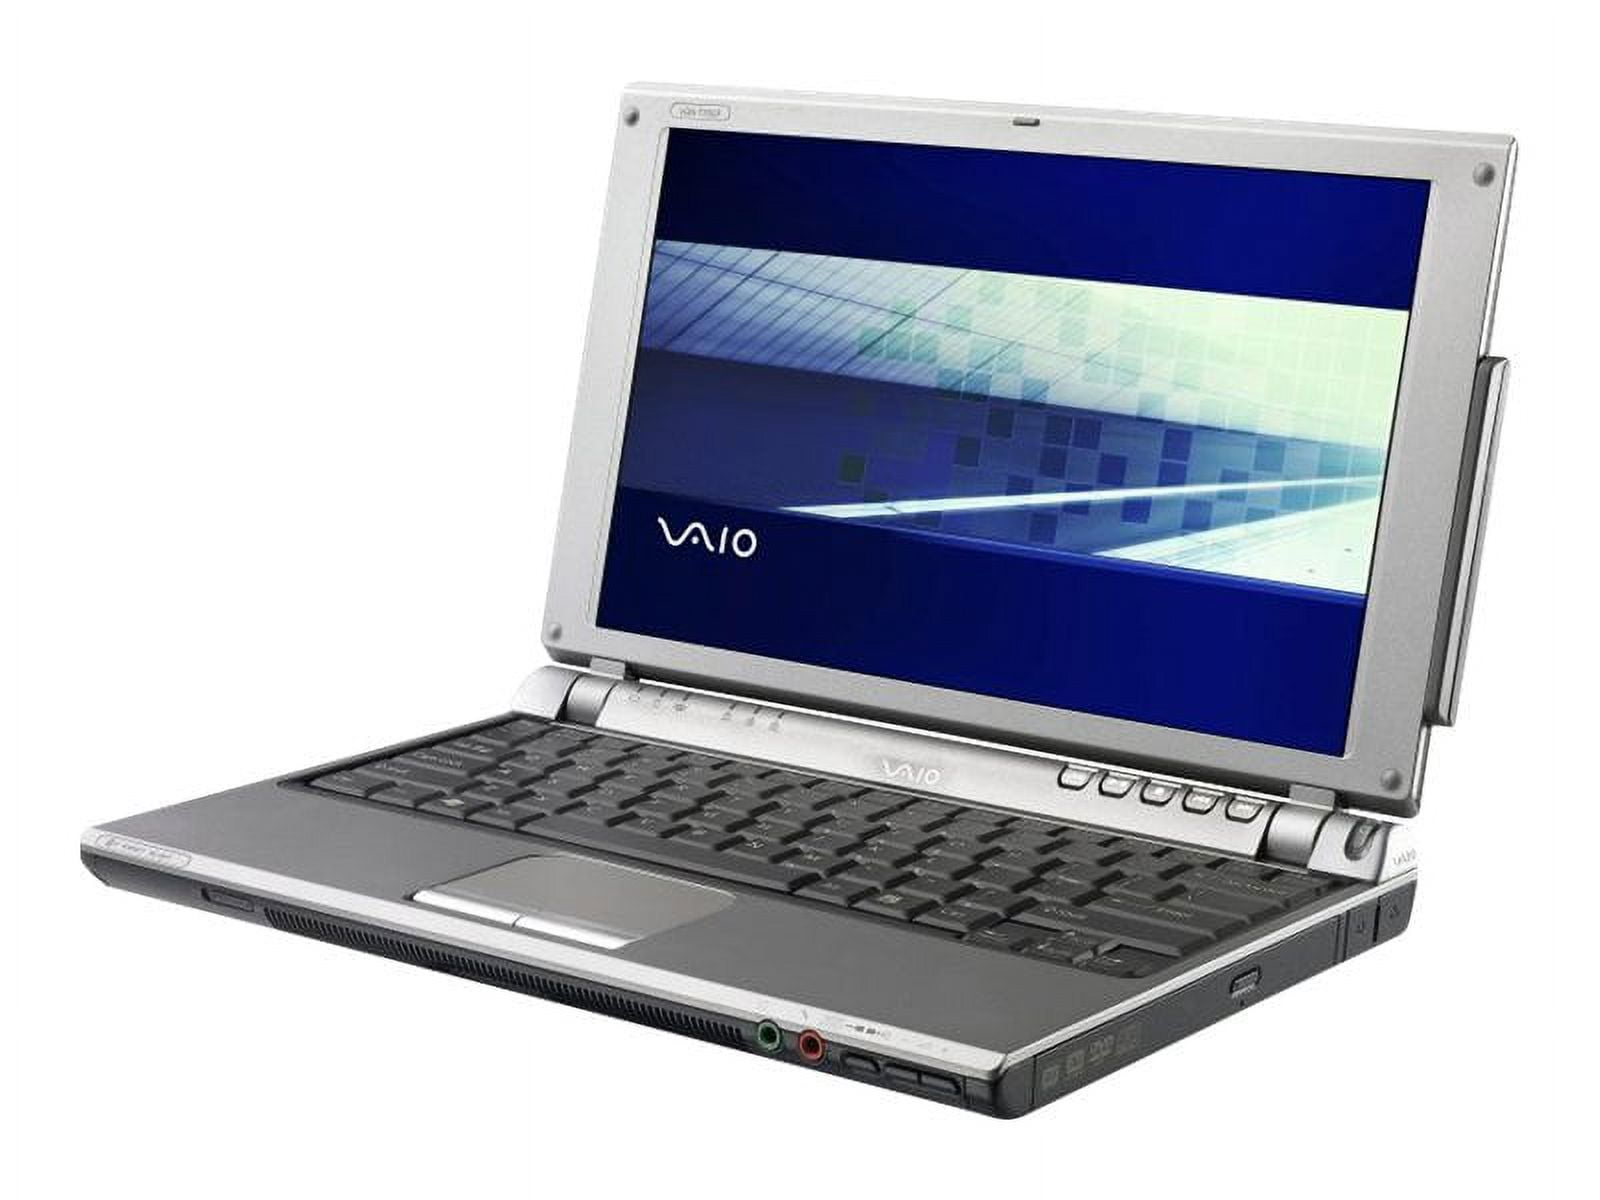 Sony VAIO VGN-T350/L - Pentium M 753 / 1.2 GHz ULV - Win XP Home